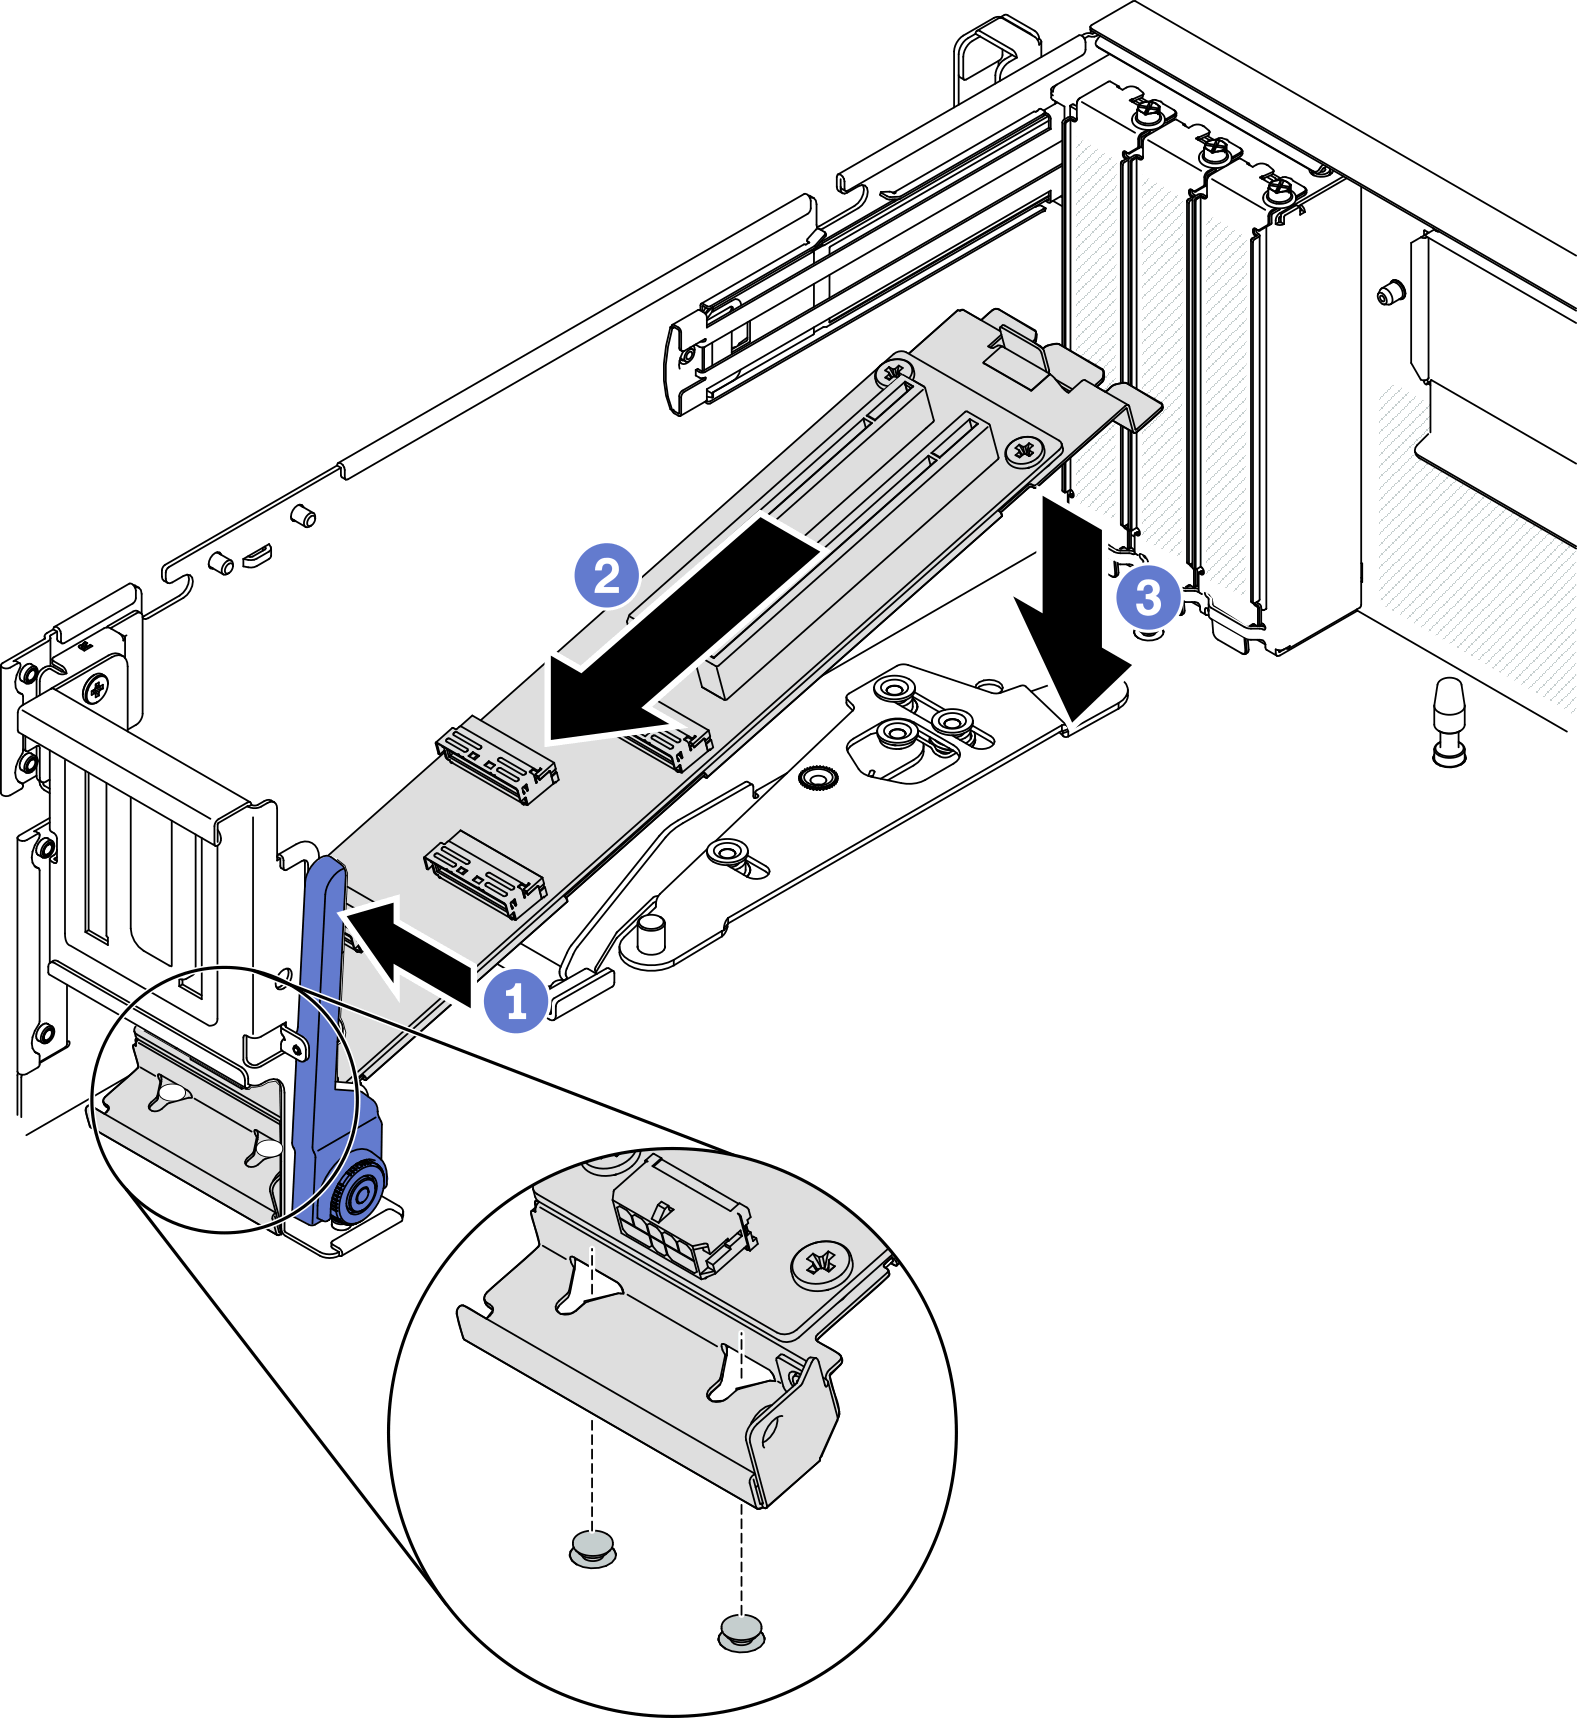 Placing the 正面 I/O 扩展板模块 into the chassis